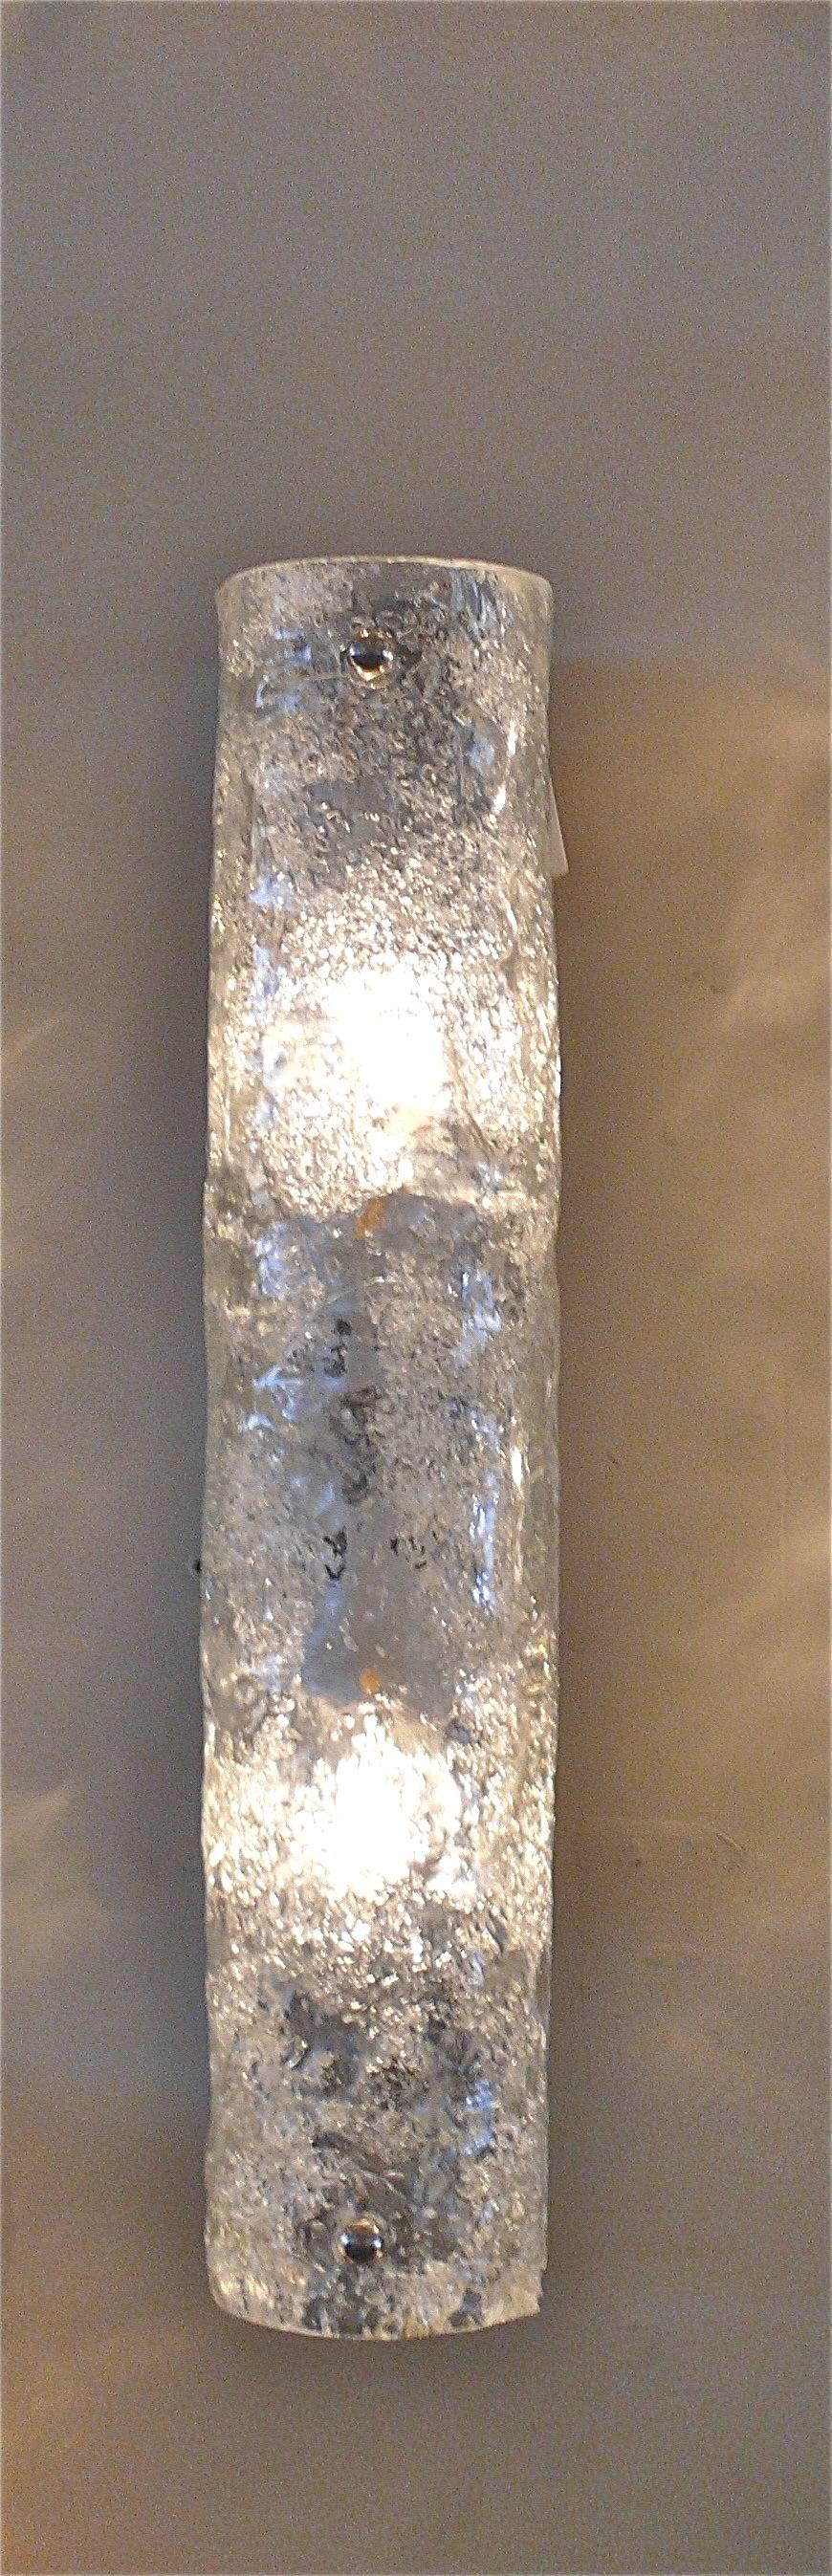 Pair of Austrian tube sconces made of thick clear textured ice glass in a curved tube shape with chrome hardware. 
Simple and clean design.
Can be hung horizontally or vertically. 
Newly rewired.
Sold as a pair.